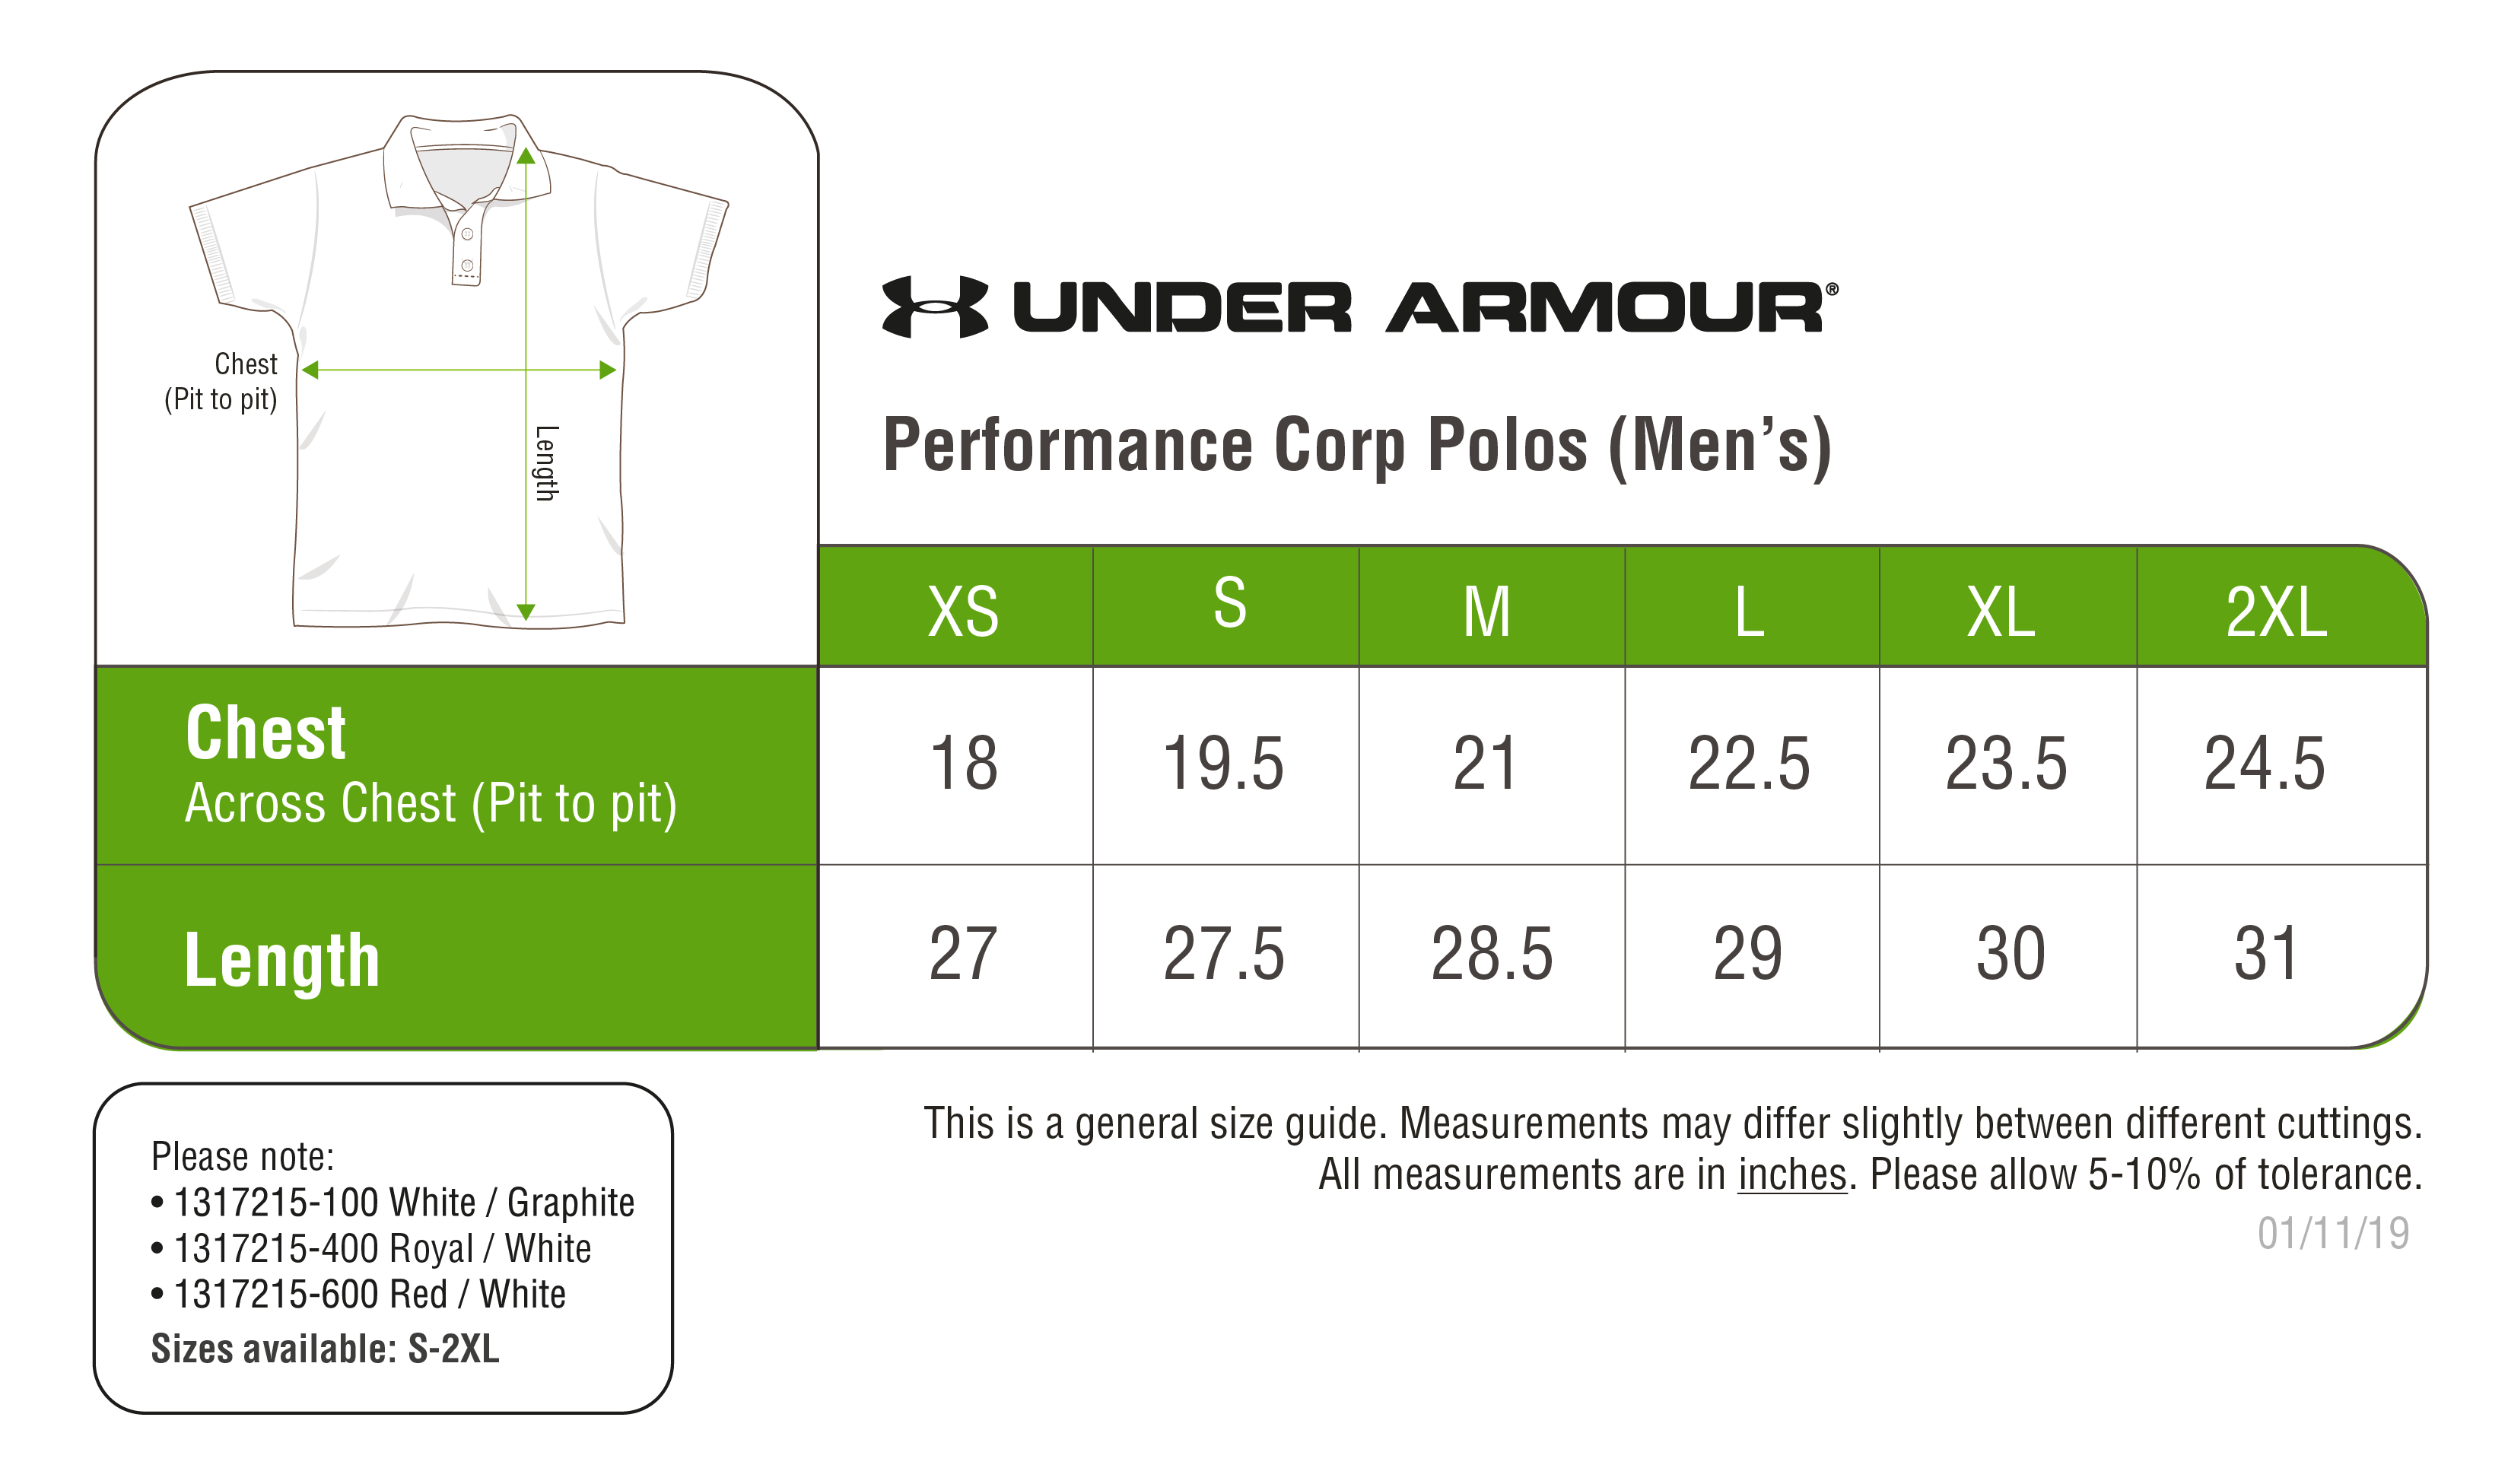 Under Armour Performance Corp Polos (Men) - Ark Industries